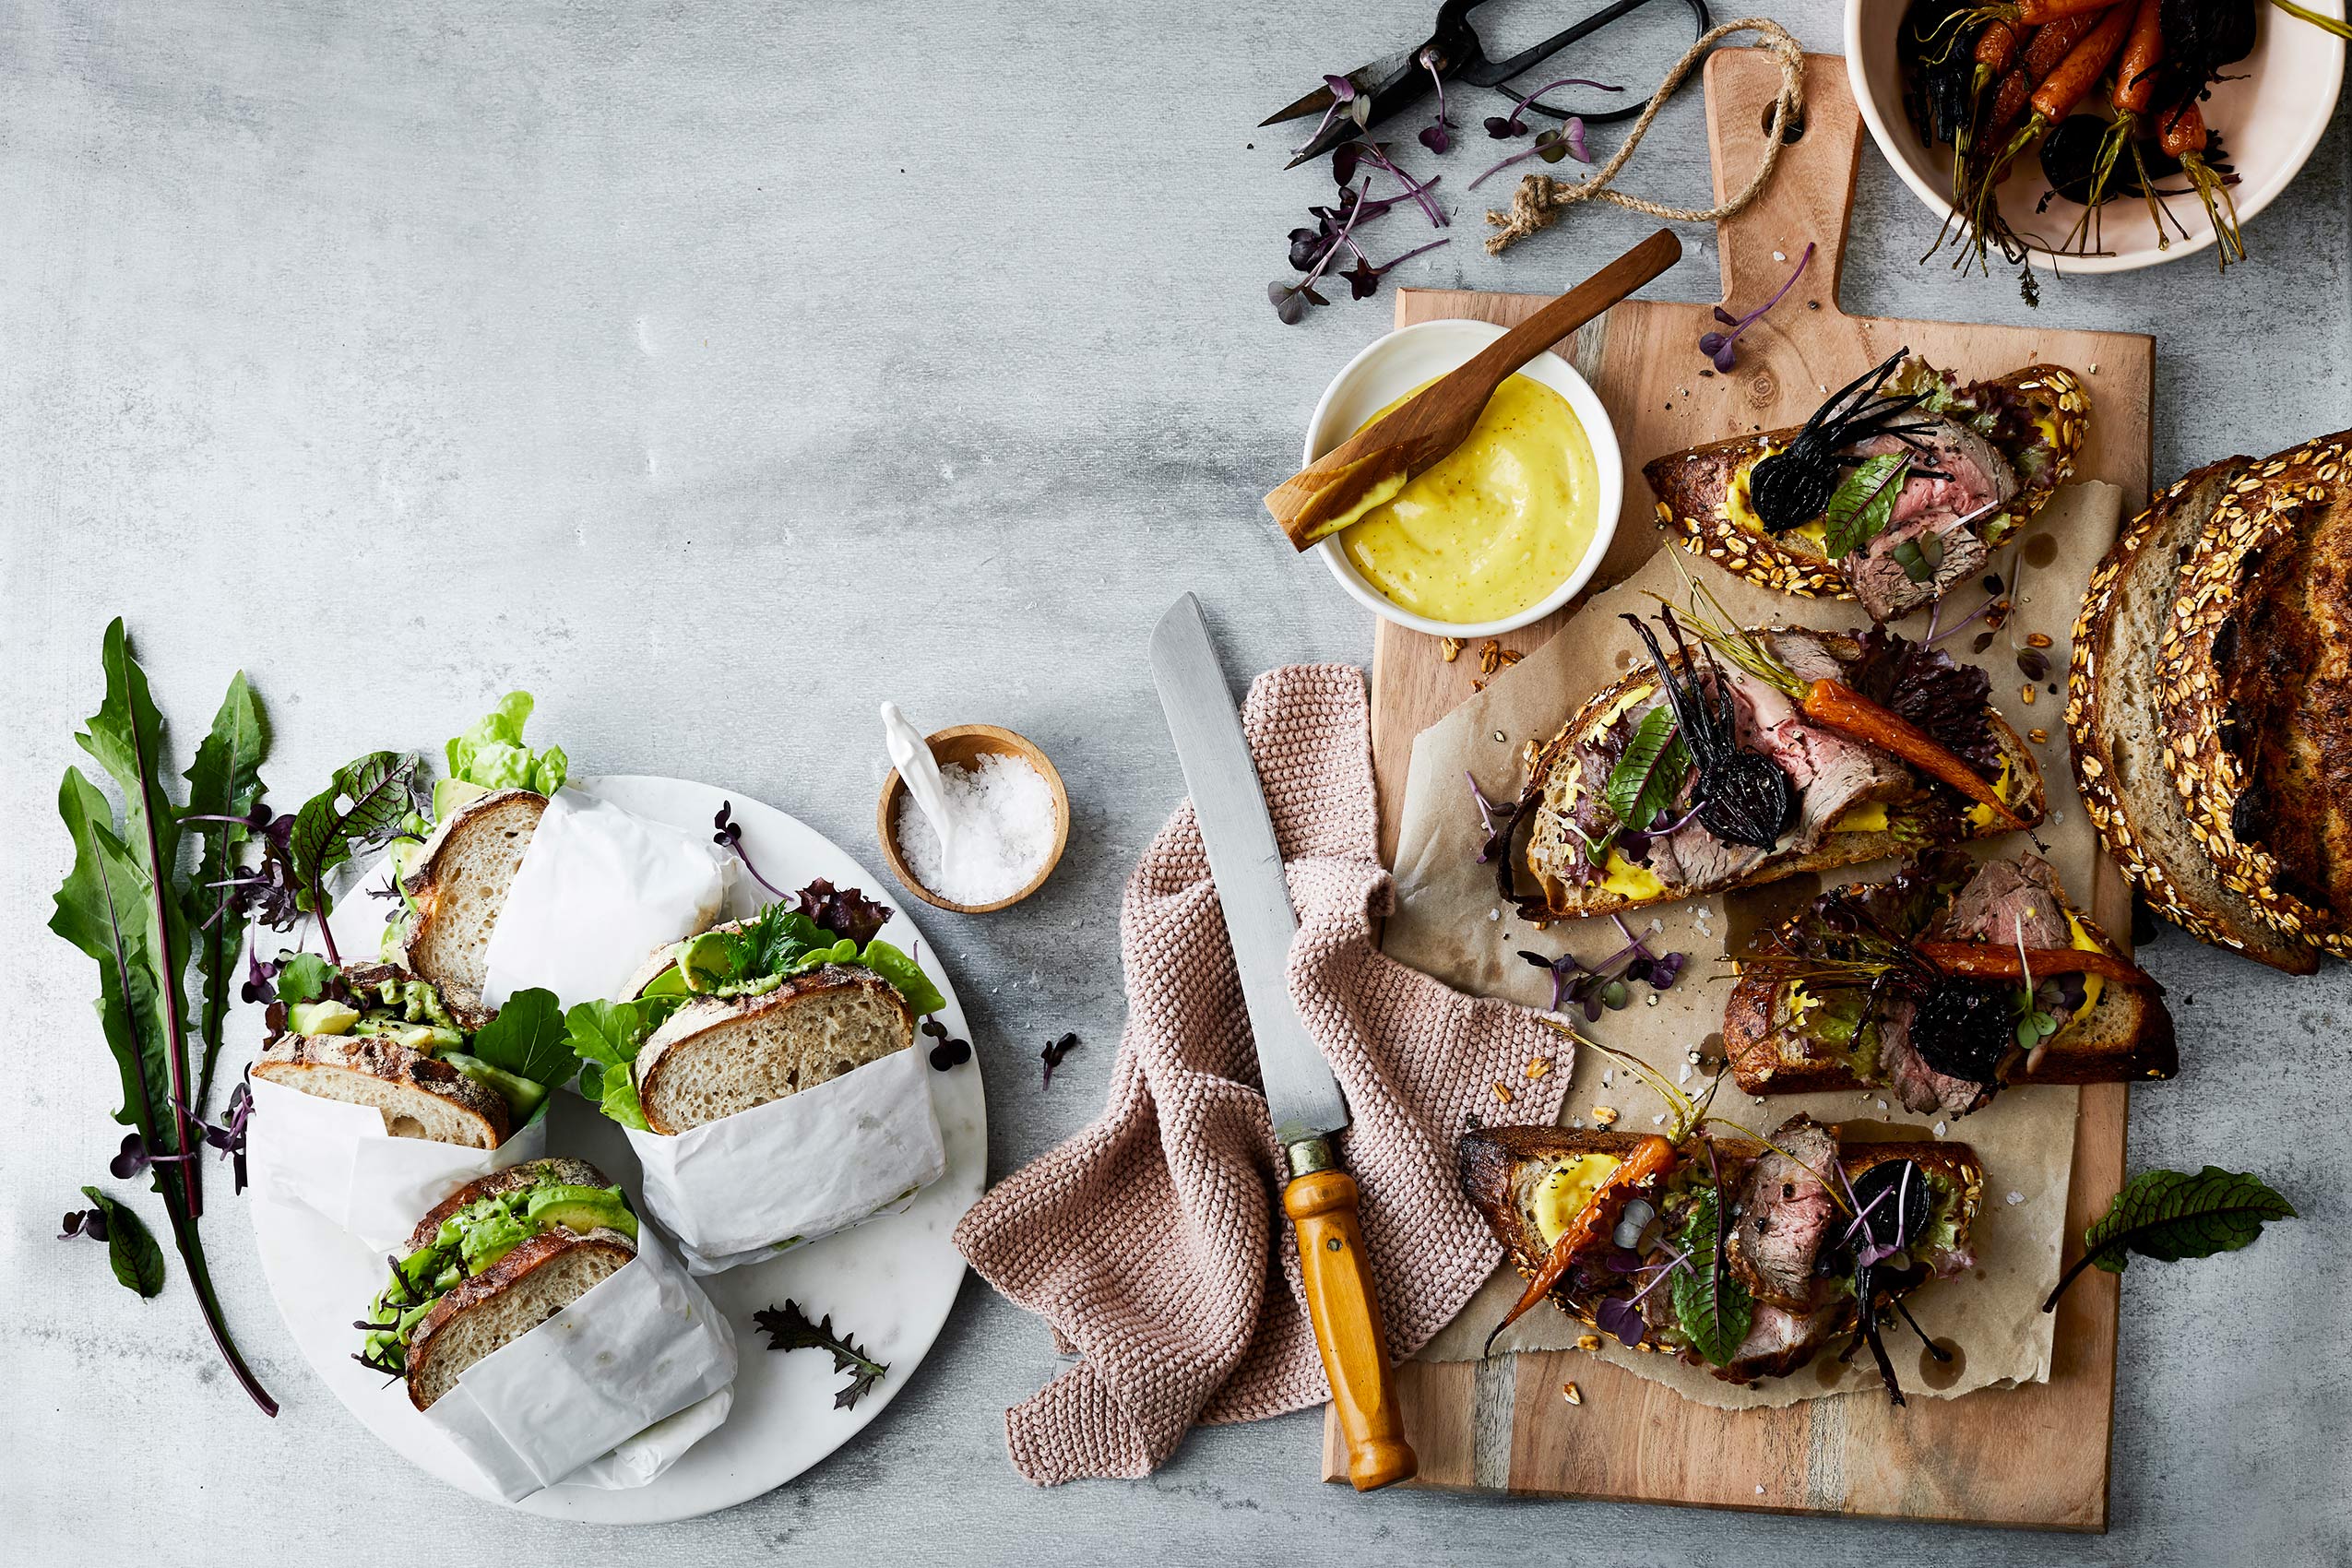 Roast Beef & Mustard Sandwiches with Fresh Greens • Advertising & Editorial Food Photography